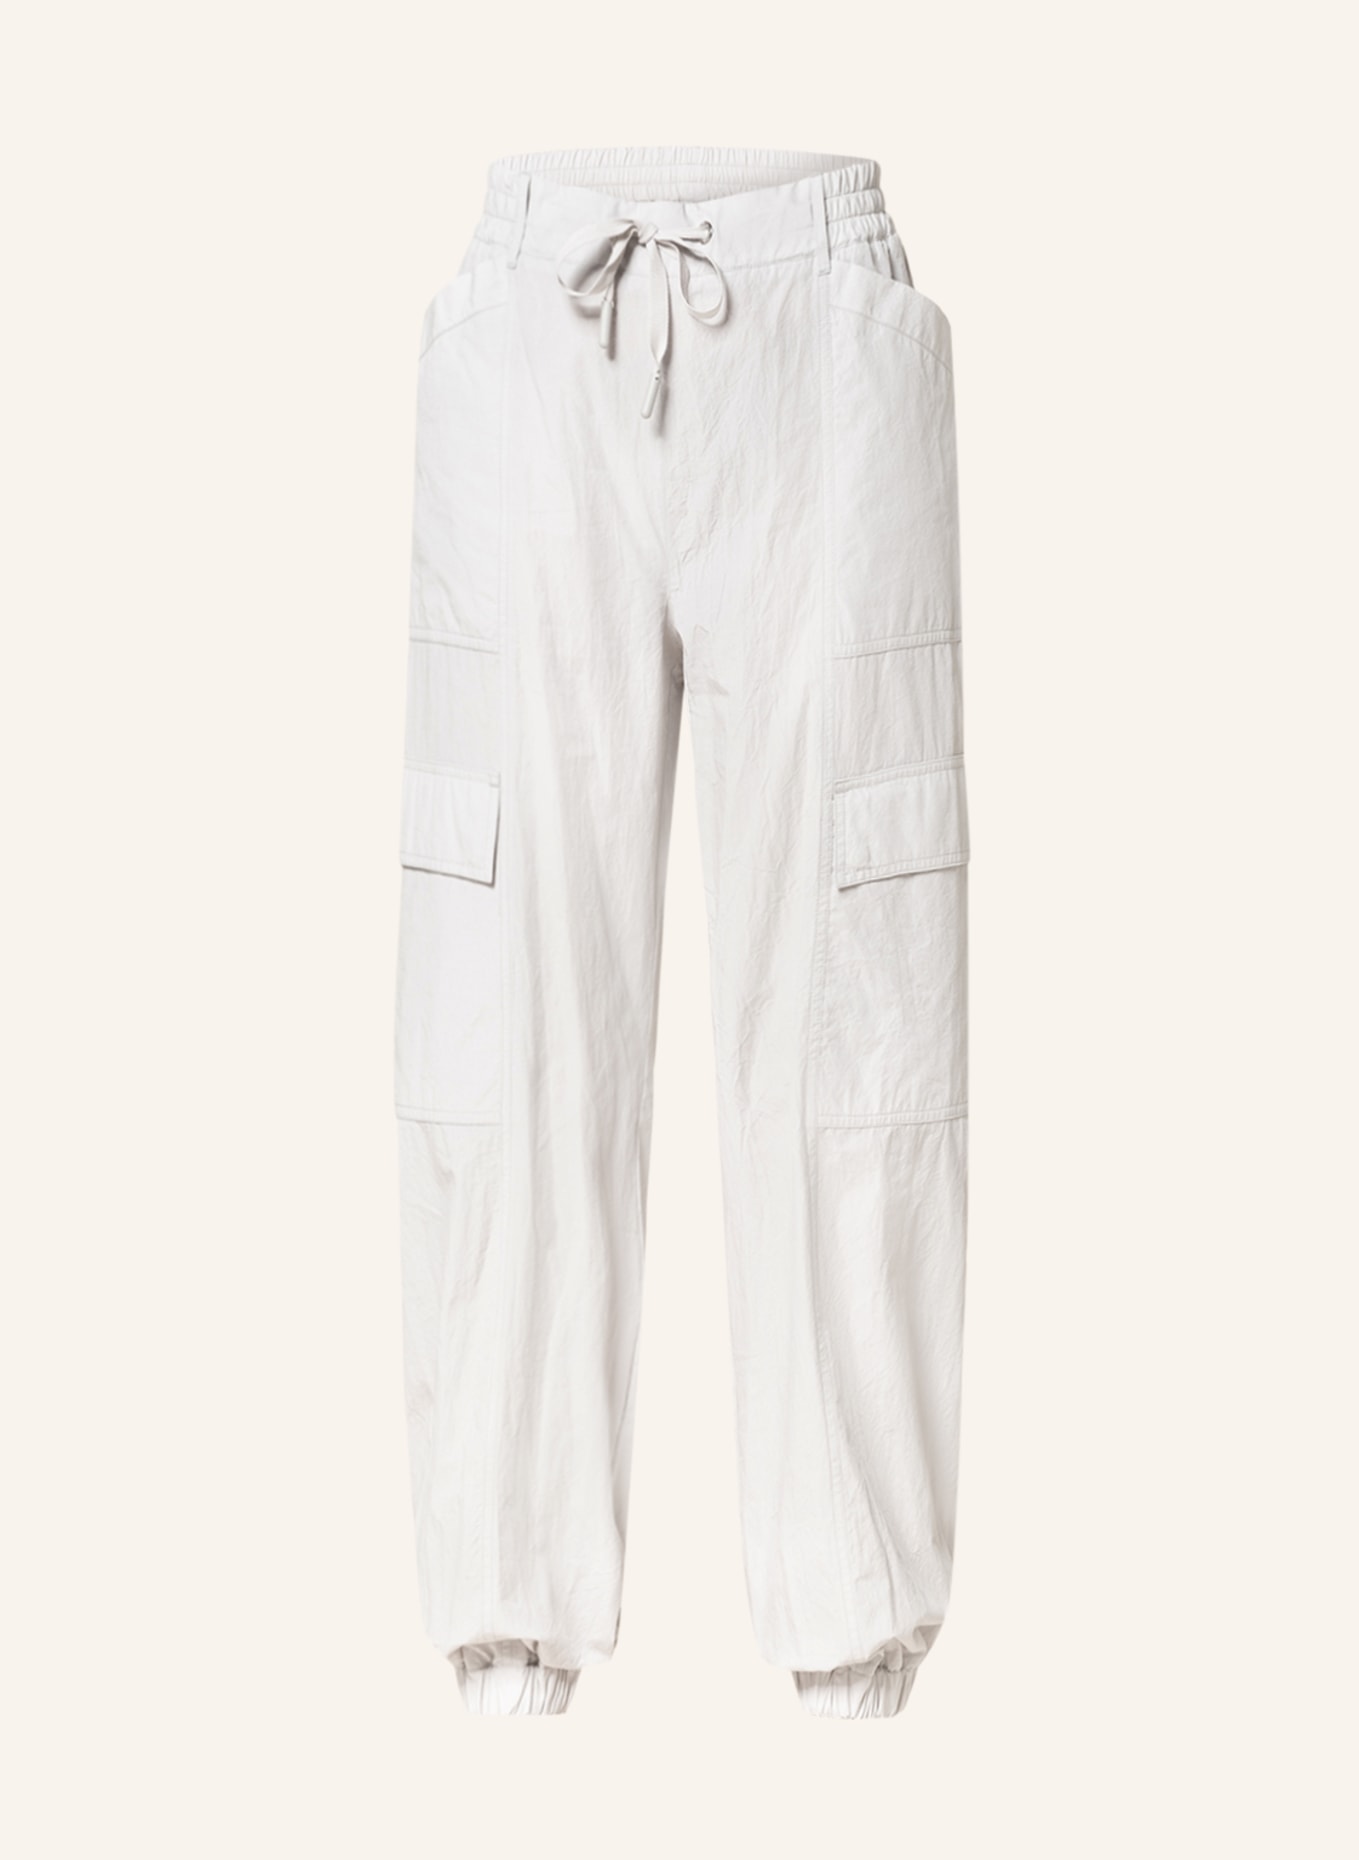 MONCLER Pants in jogger style, Color: LIGHT GRAY (Image 1)